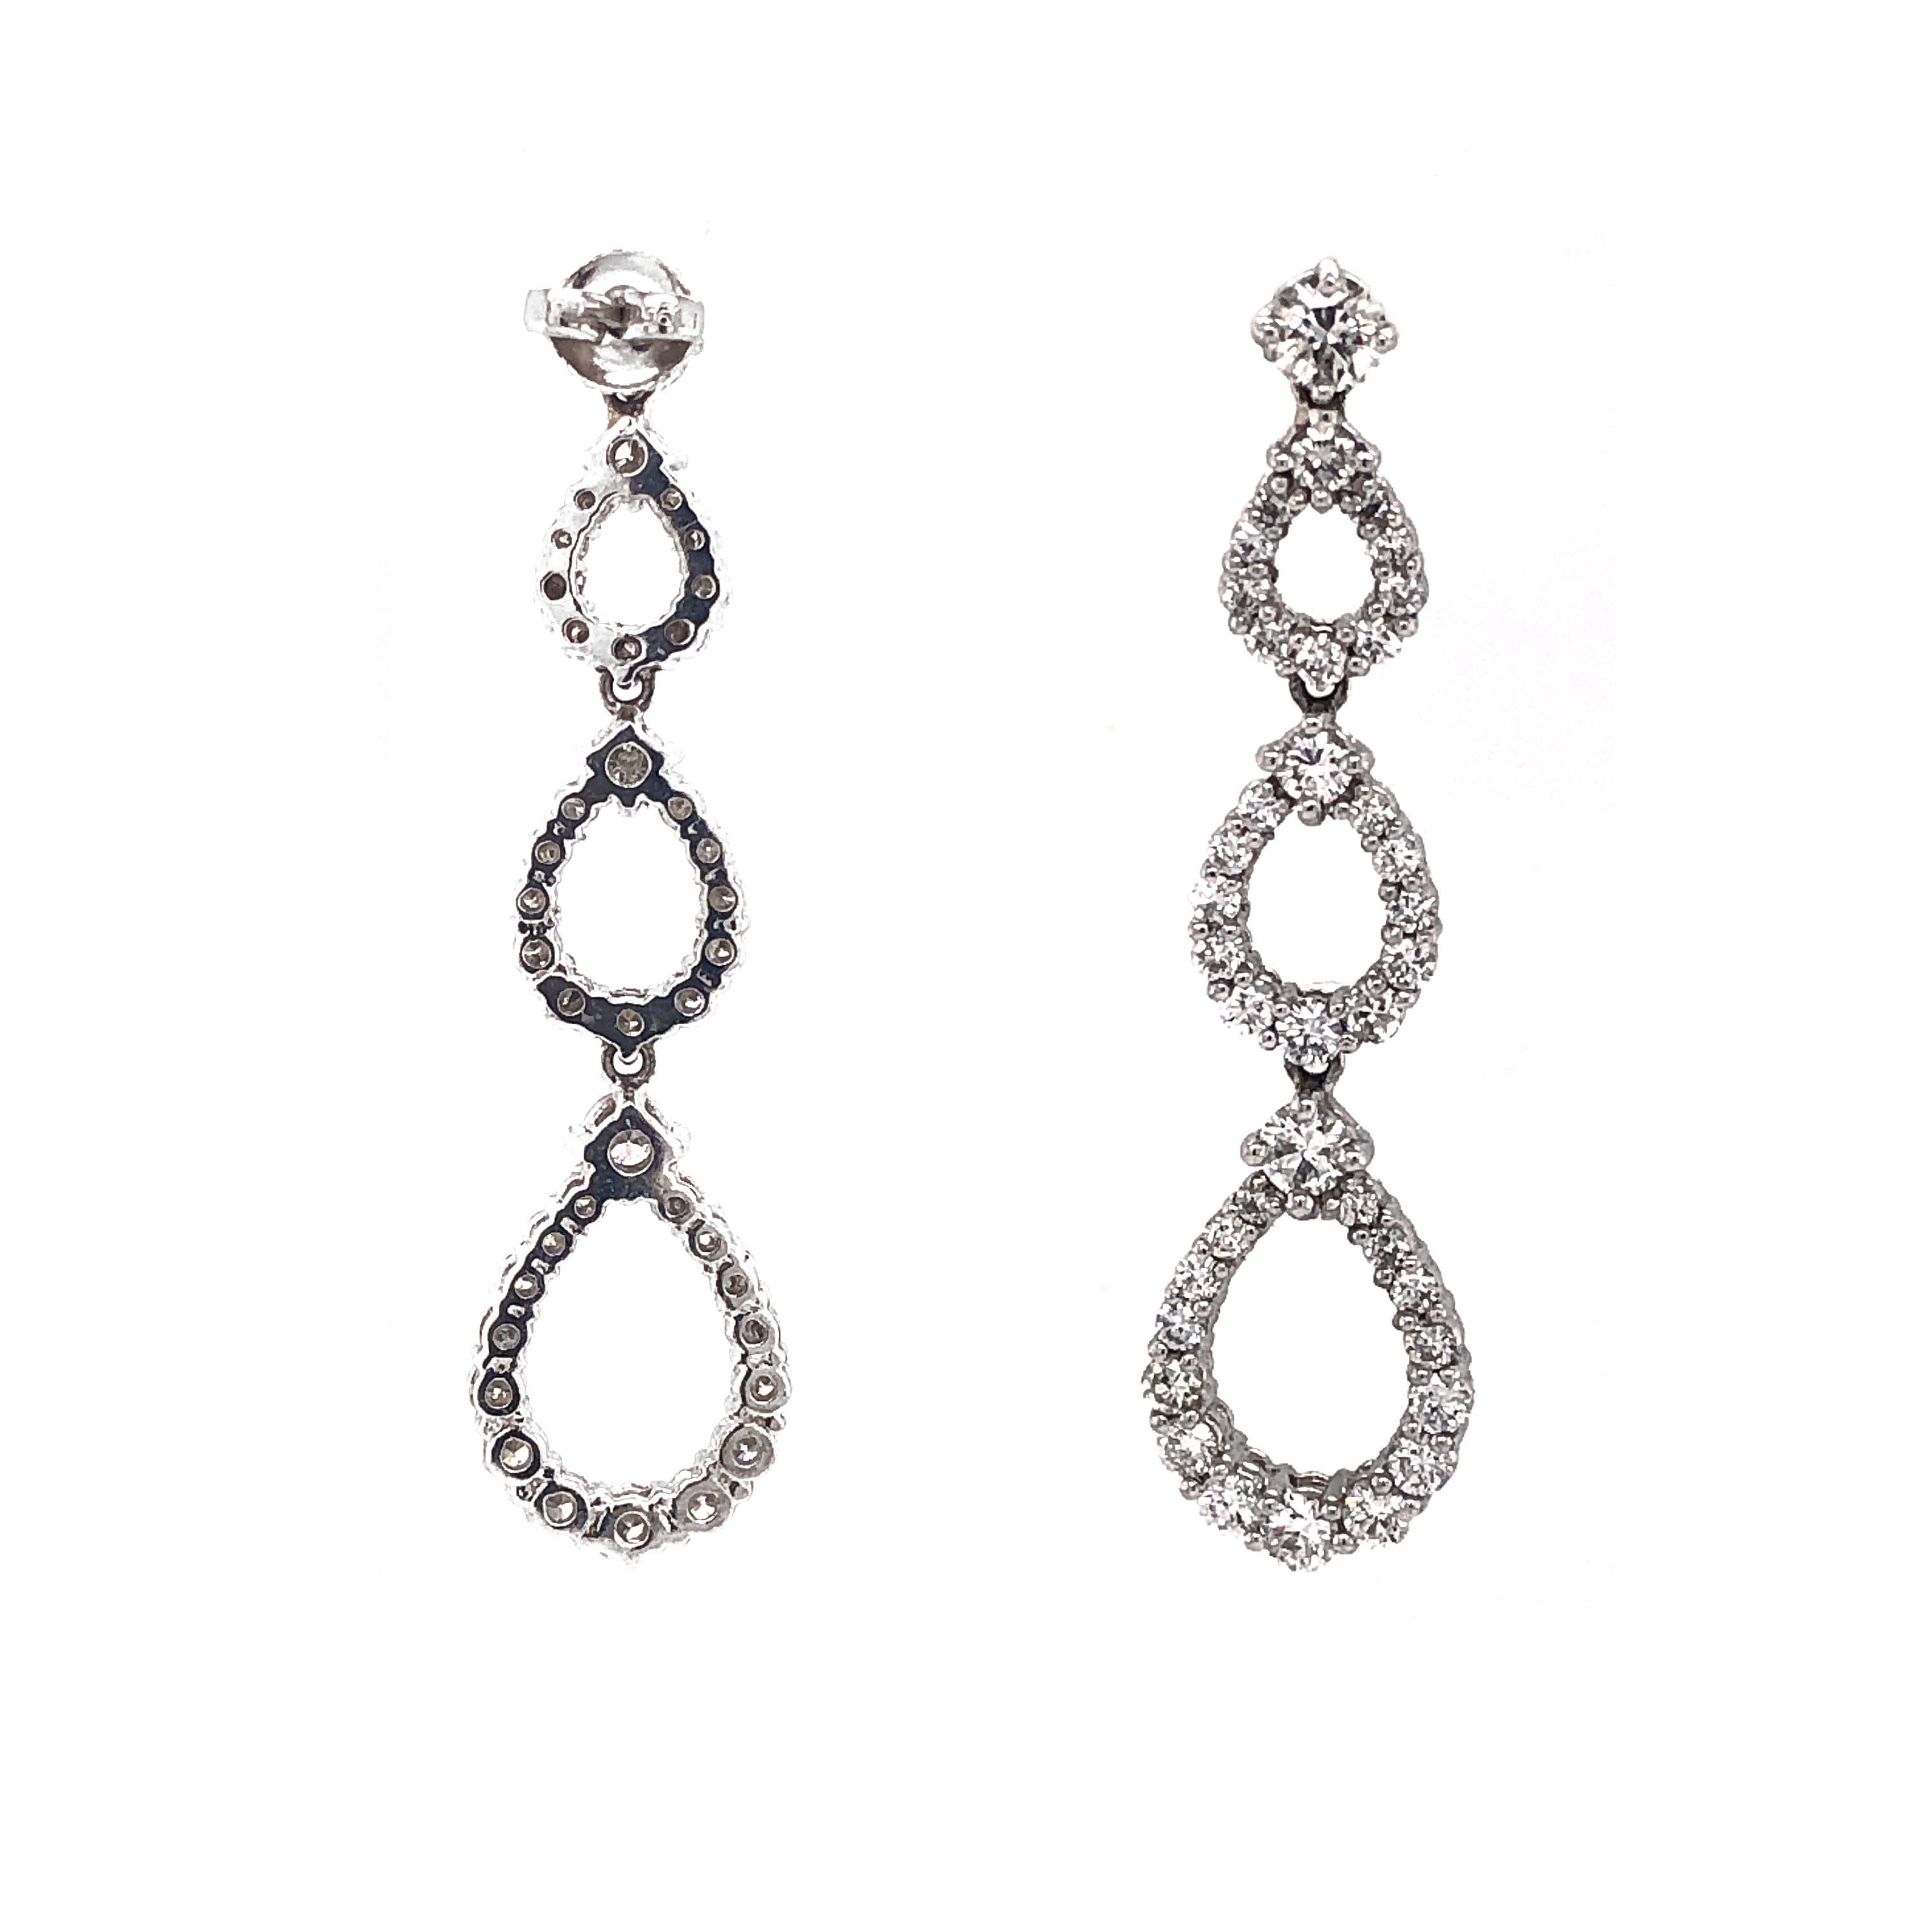 Contemporary Pear Shapes Round Cut White Diamonds 4.53 Carat Dangling Platinum Earrings For Sale